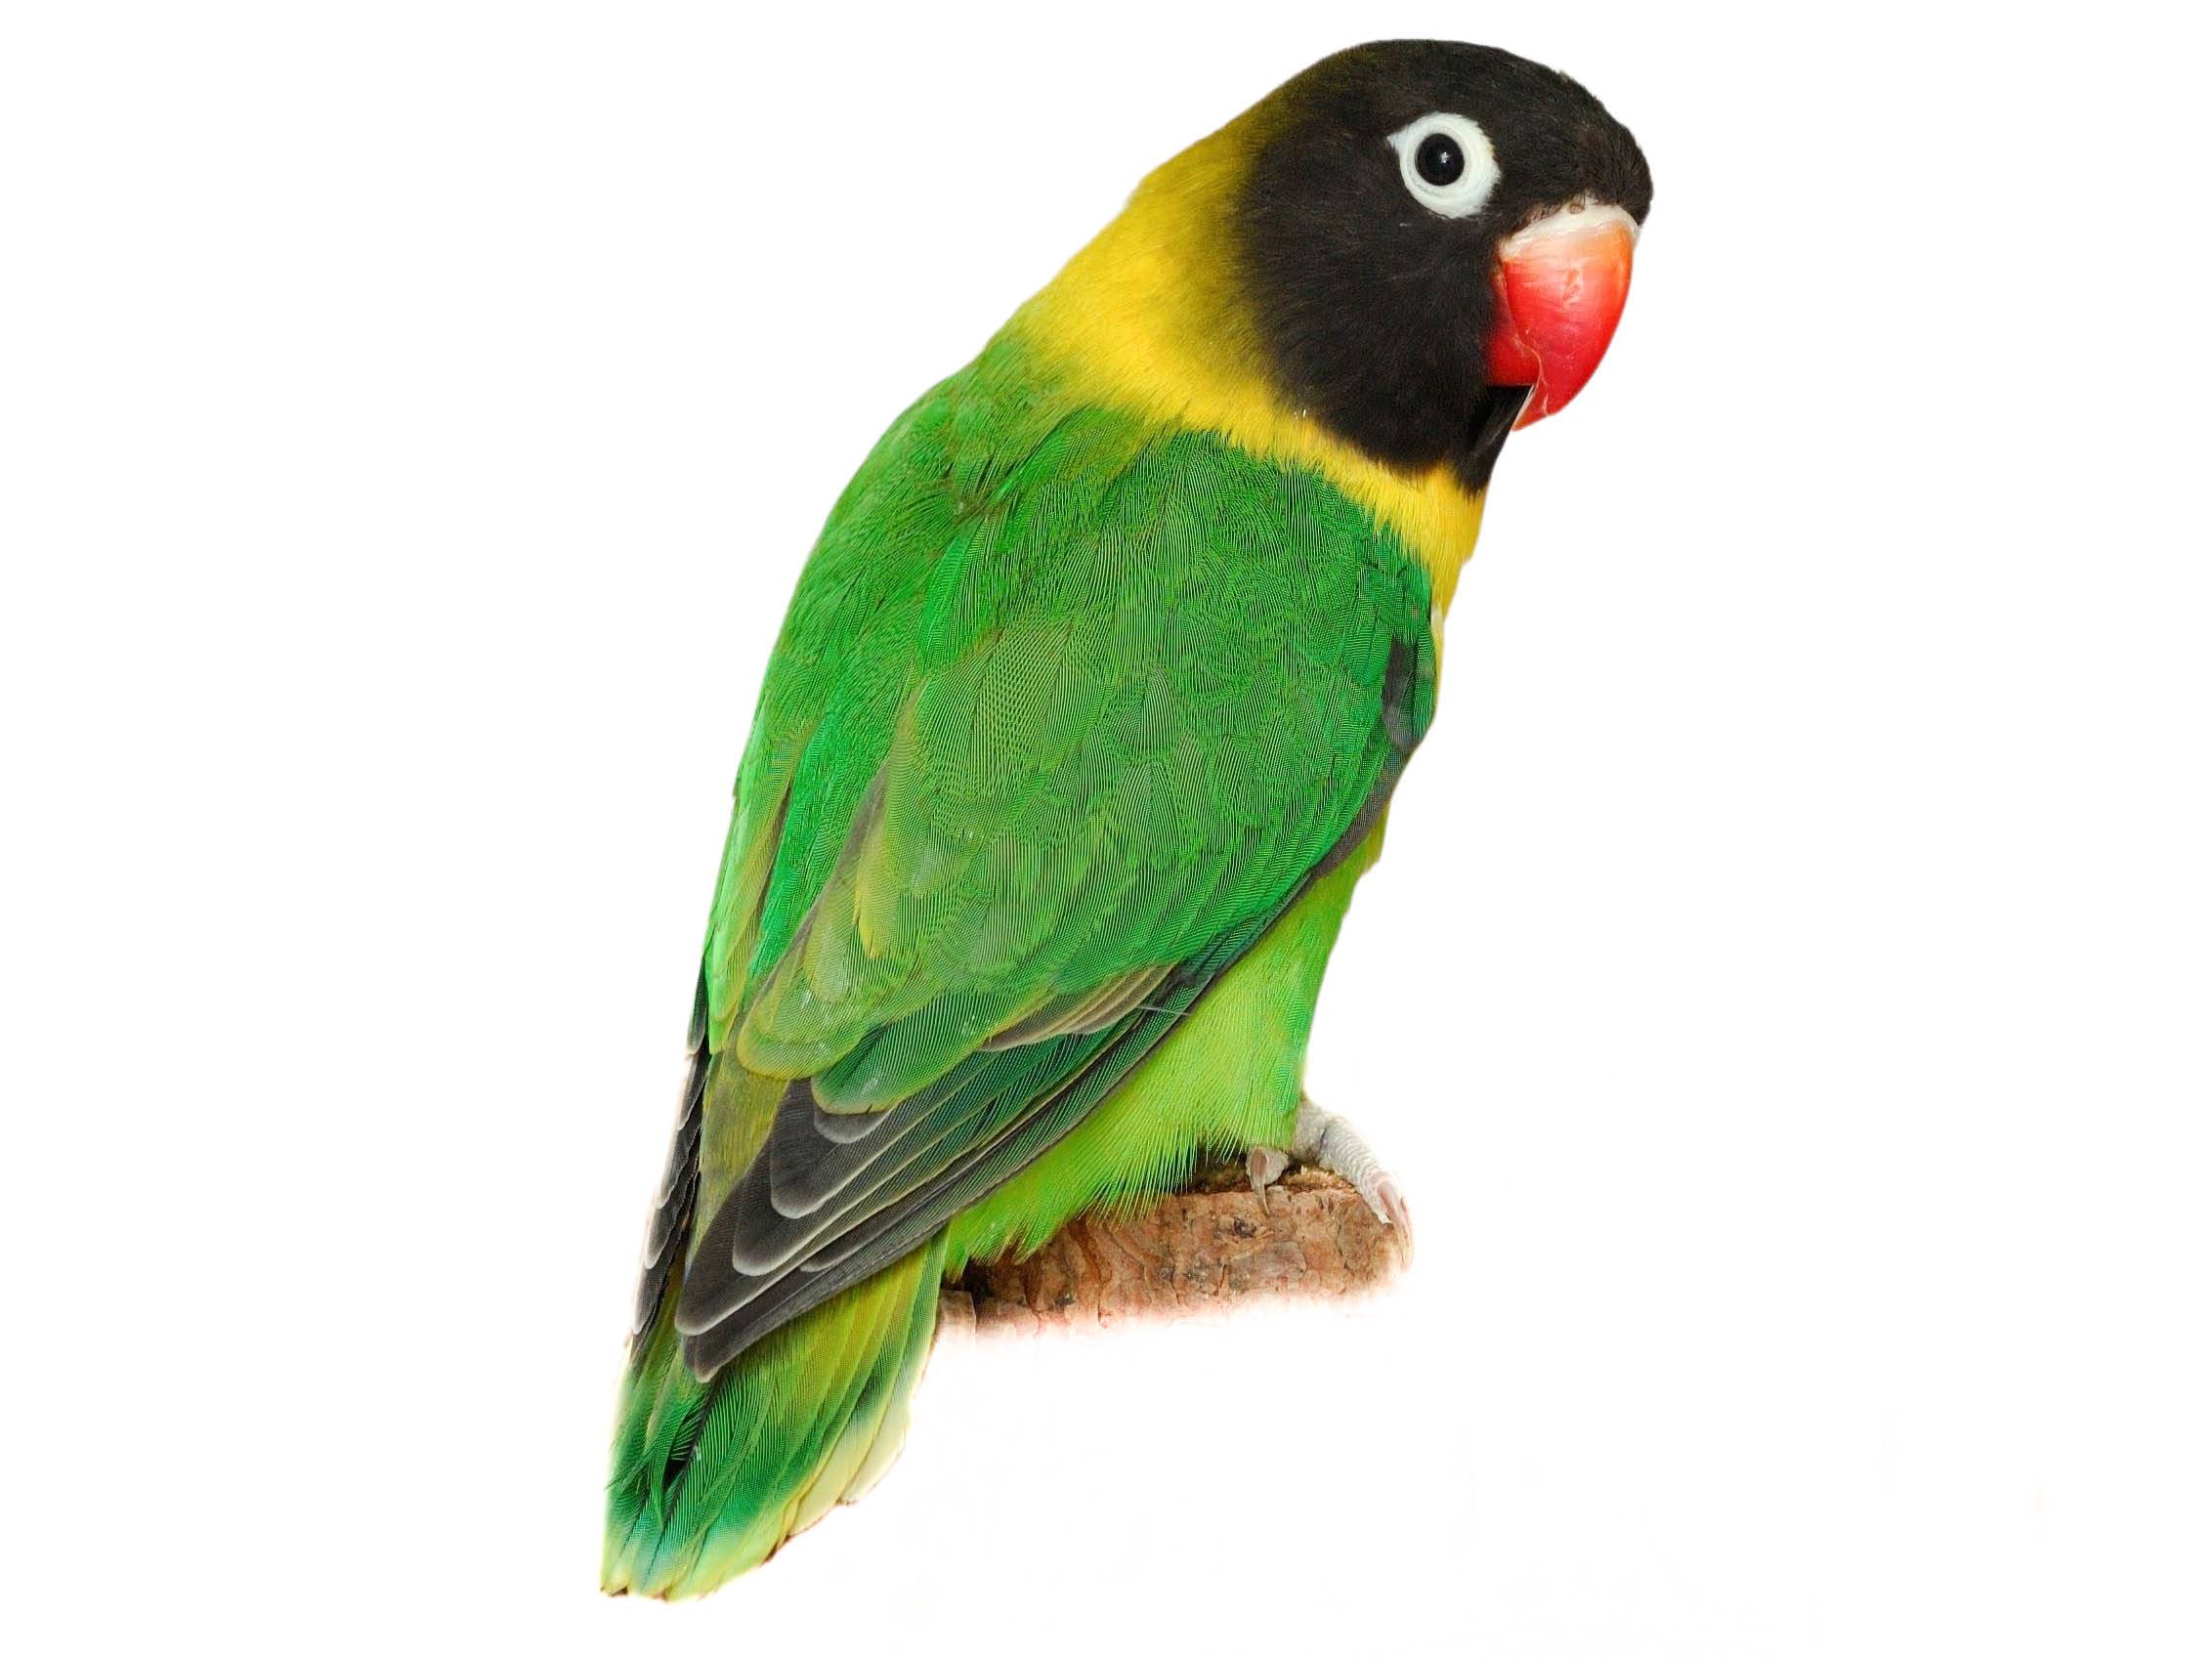 A photo of a Yellow-collared Lovebird (Agapornis personatus)